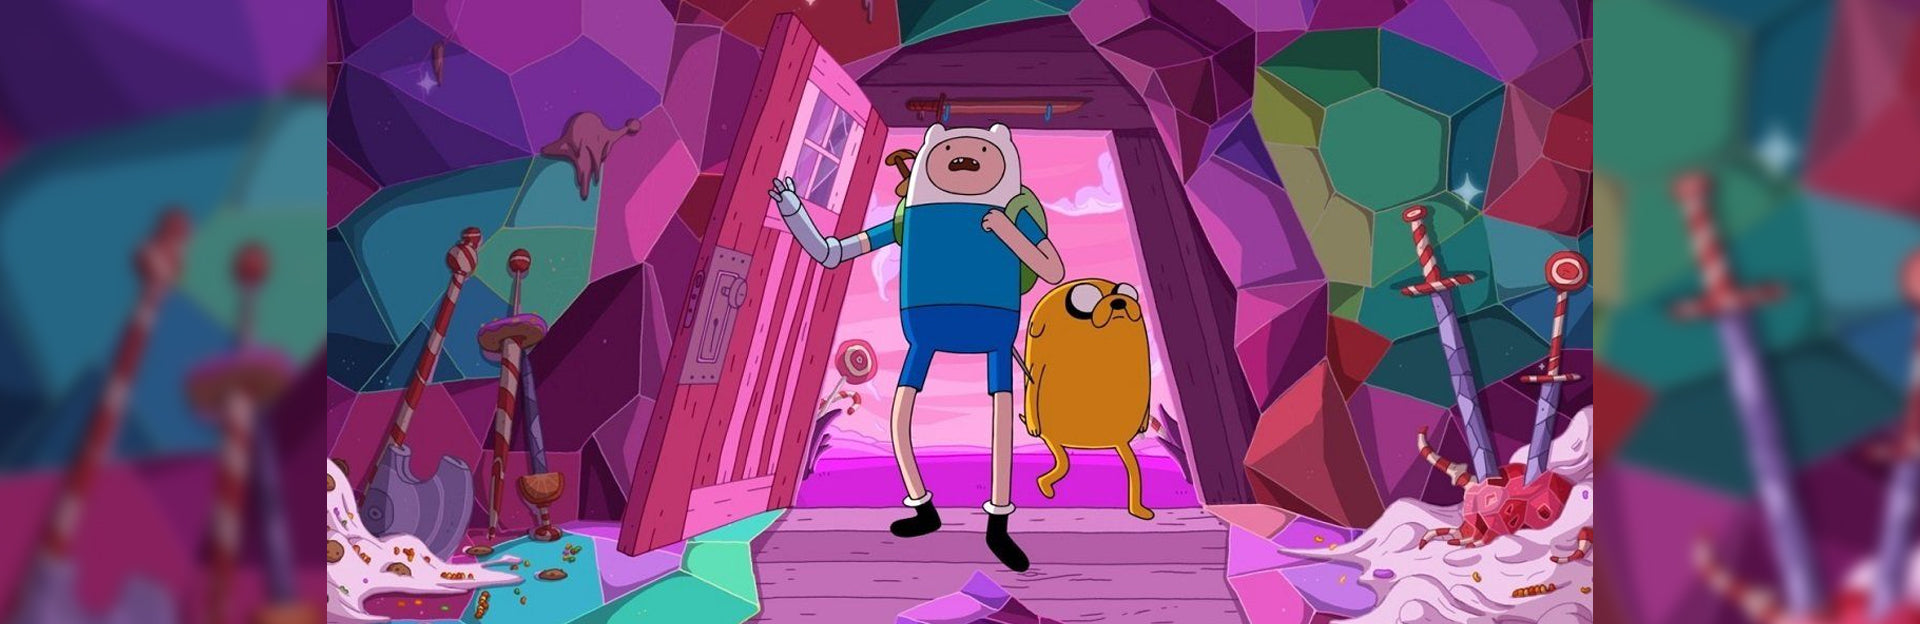 New Adventure Time game and title combining Cartoon Network